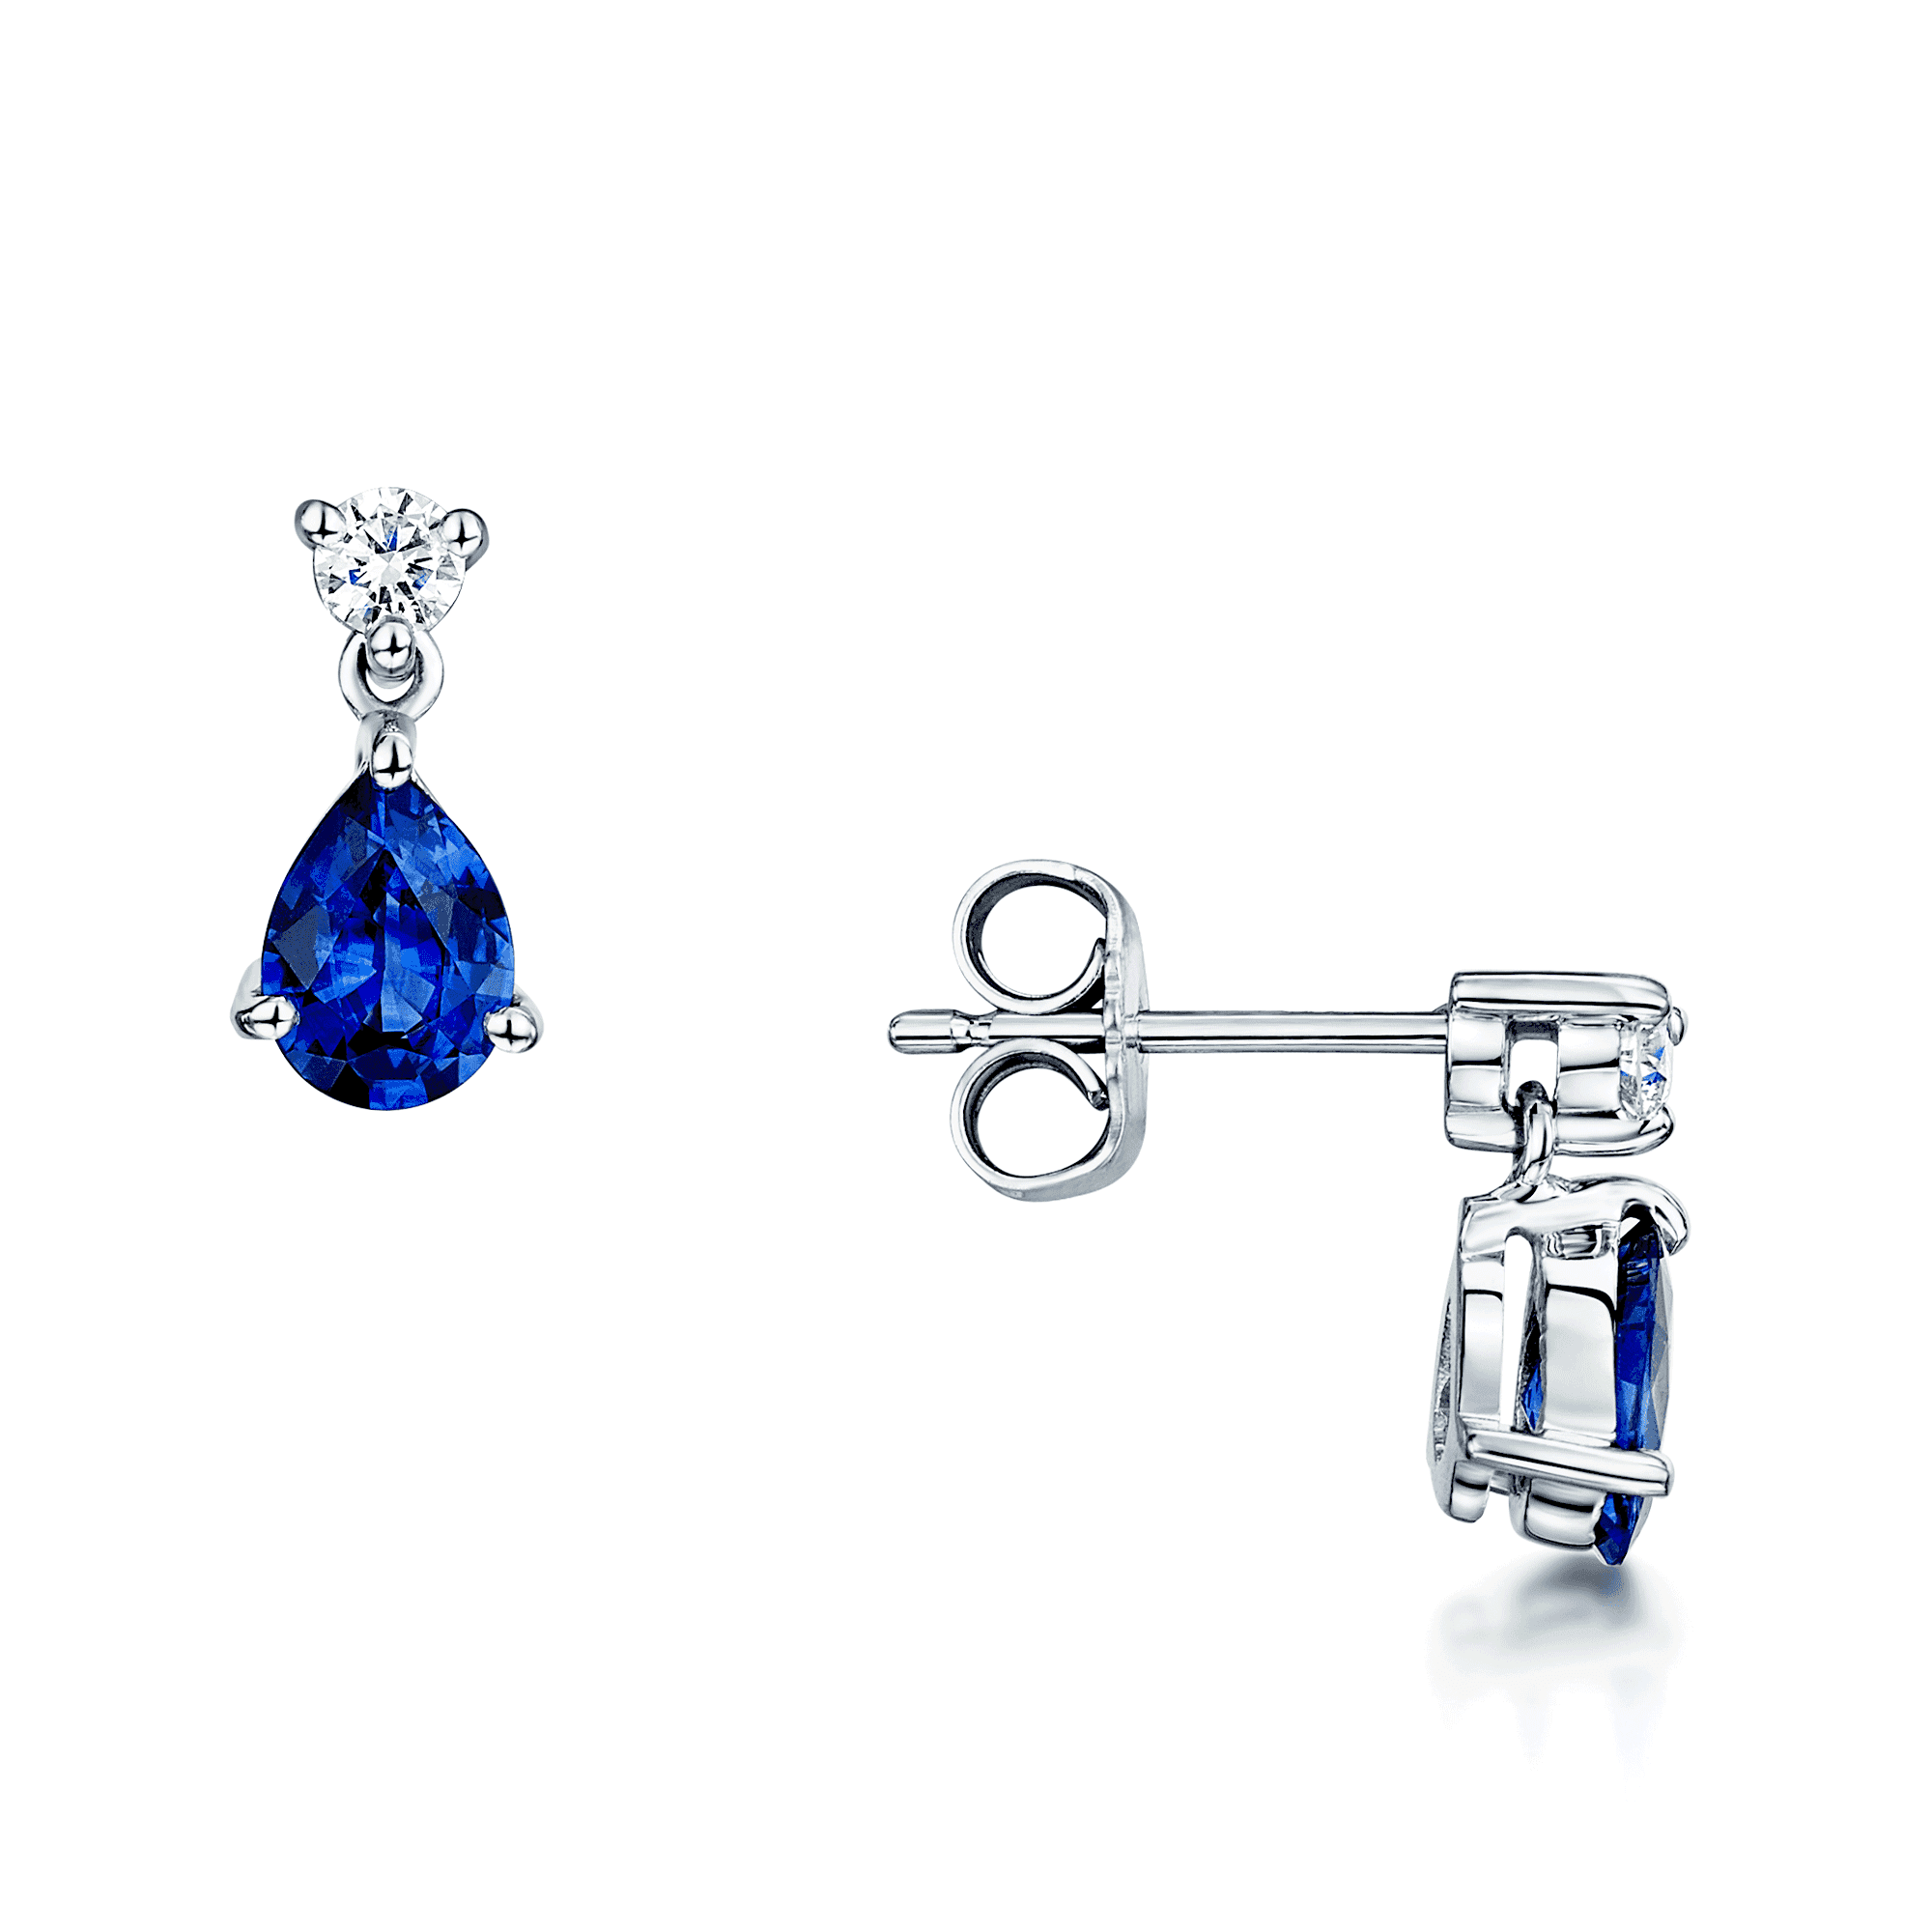 18ct White Gold Pear Cut Sapphire and Diamond Earrings